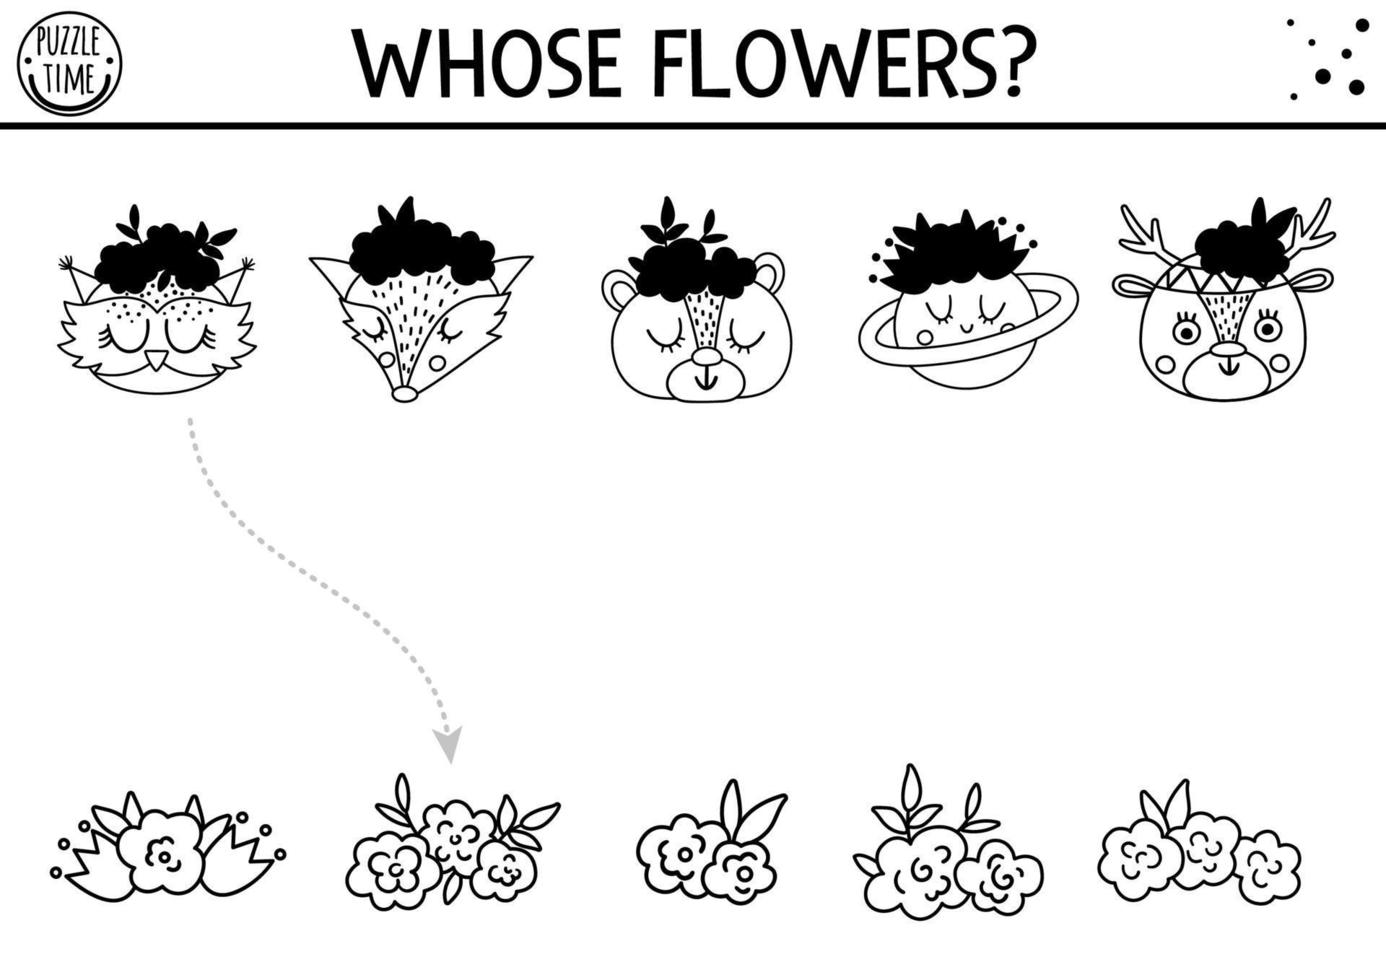 Mothers day black and white shadow matching activity for children with cute  animal and flowers on heads. Fun line game with forest animals for kids.  Find correct silhouette printable worksheet. 6959497 Vector